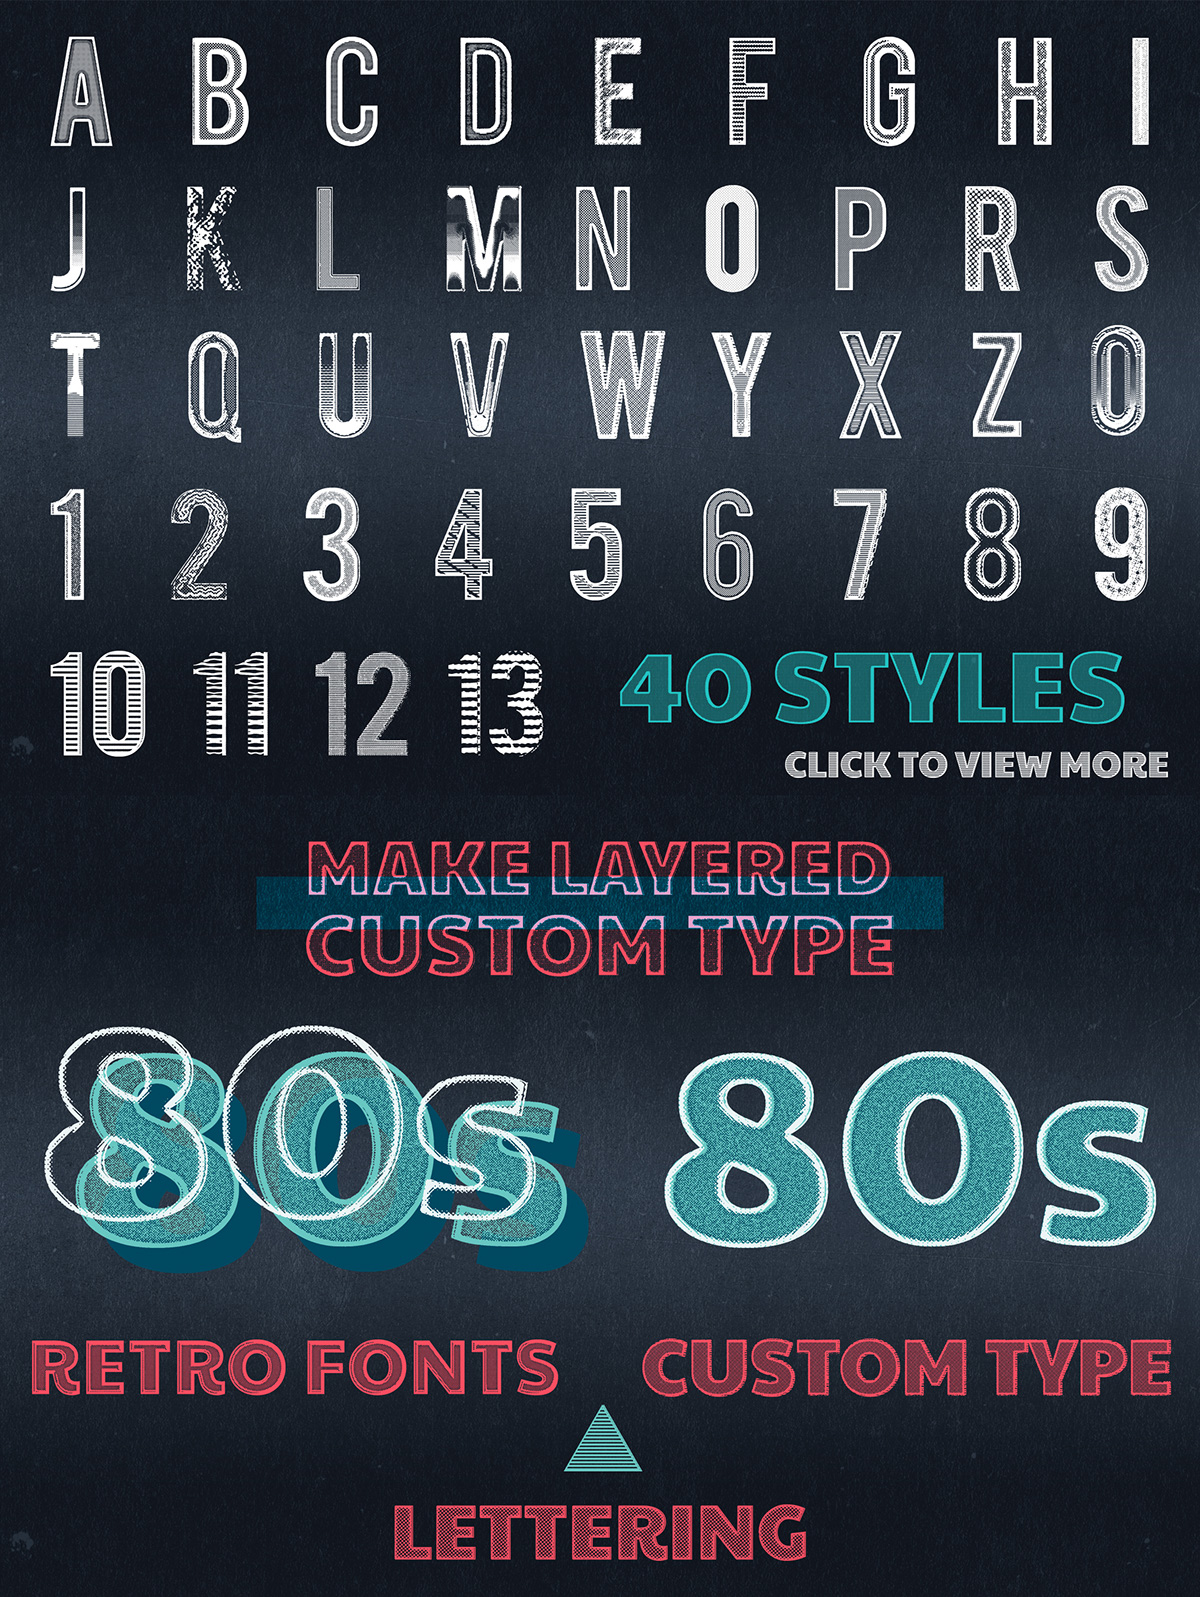 custom type 80s 80s revival 80s typography graphic styles effects adobe illustrator effects font freebie 80s font Retro 80s Retro 90s bold lettering